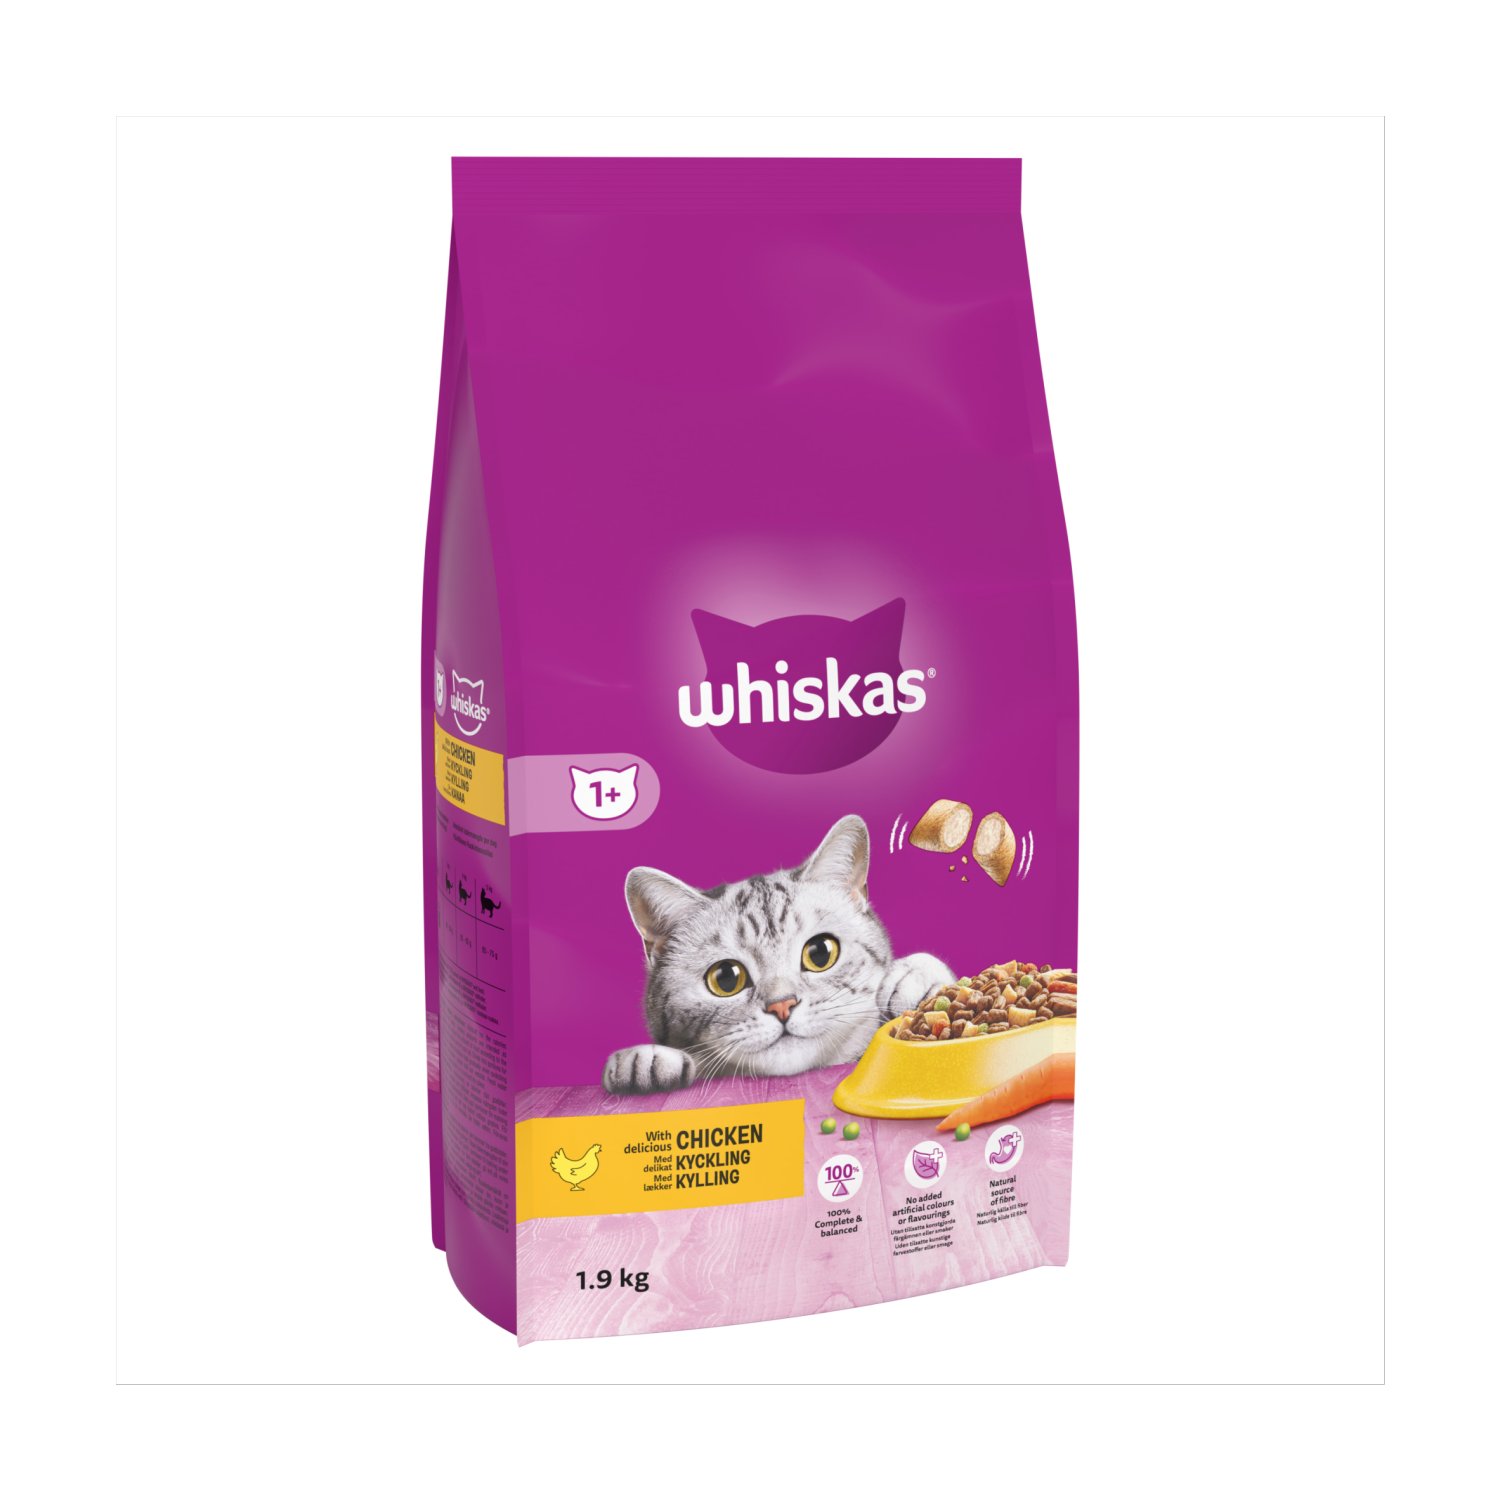 Whiskas Complete with Chicken 1+ Years Cat Food (1.9 kg)